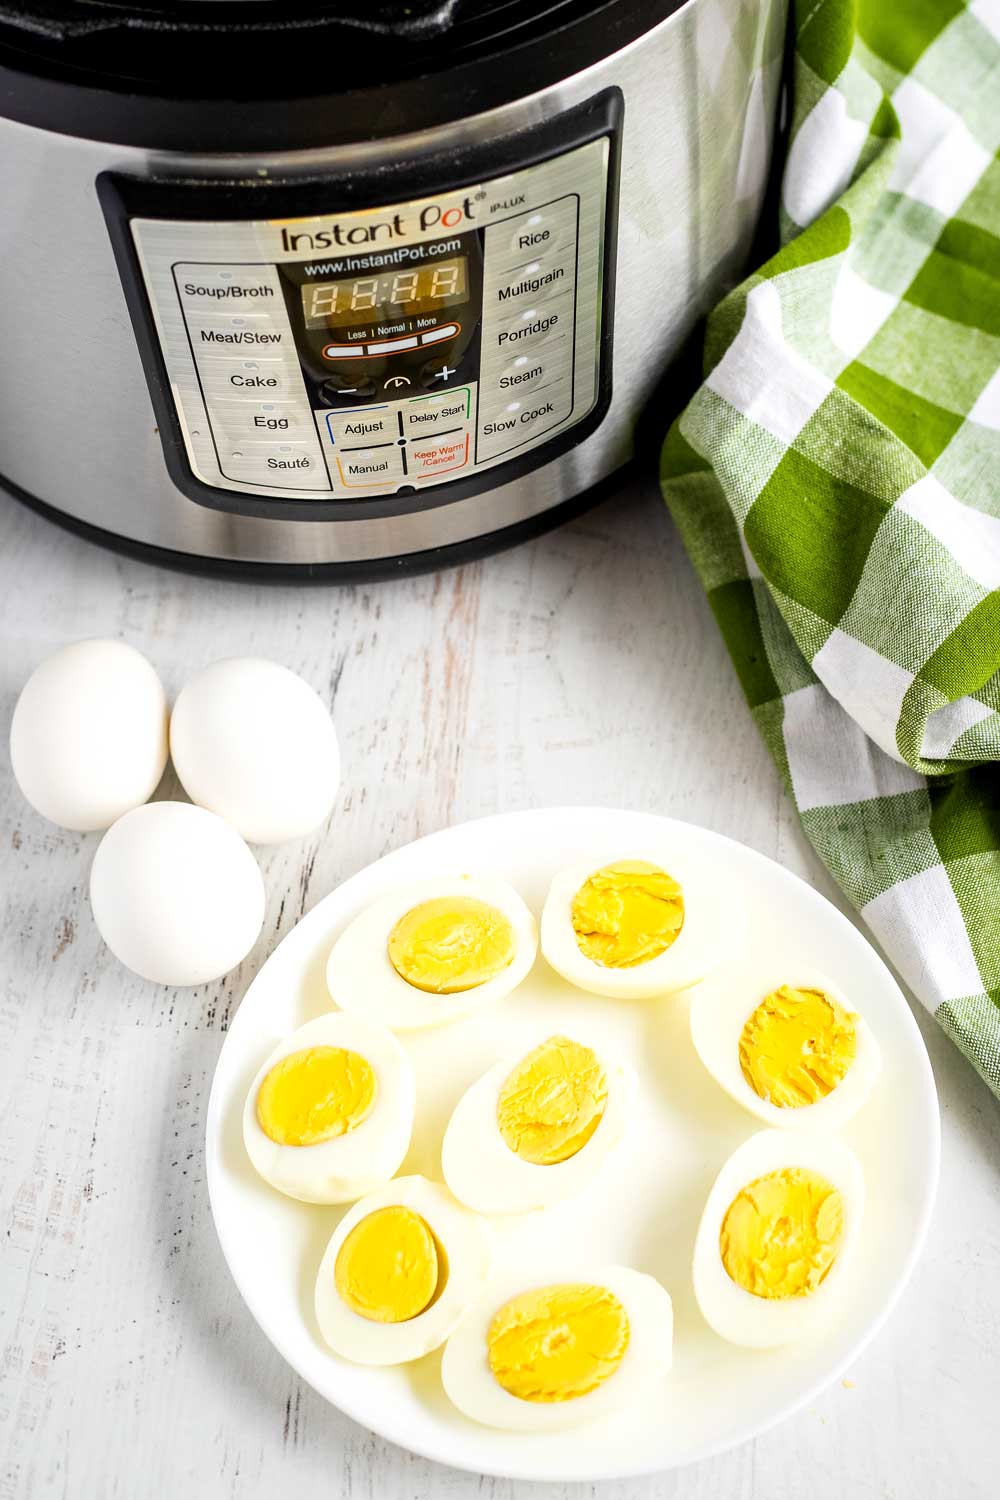 Hard-boiled eggs on a plate with an Instant Pot in the background